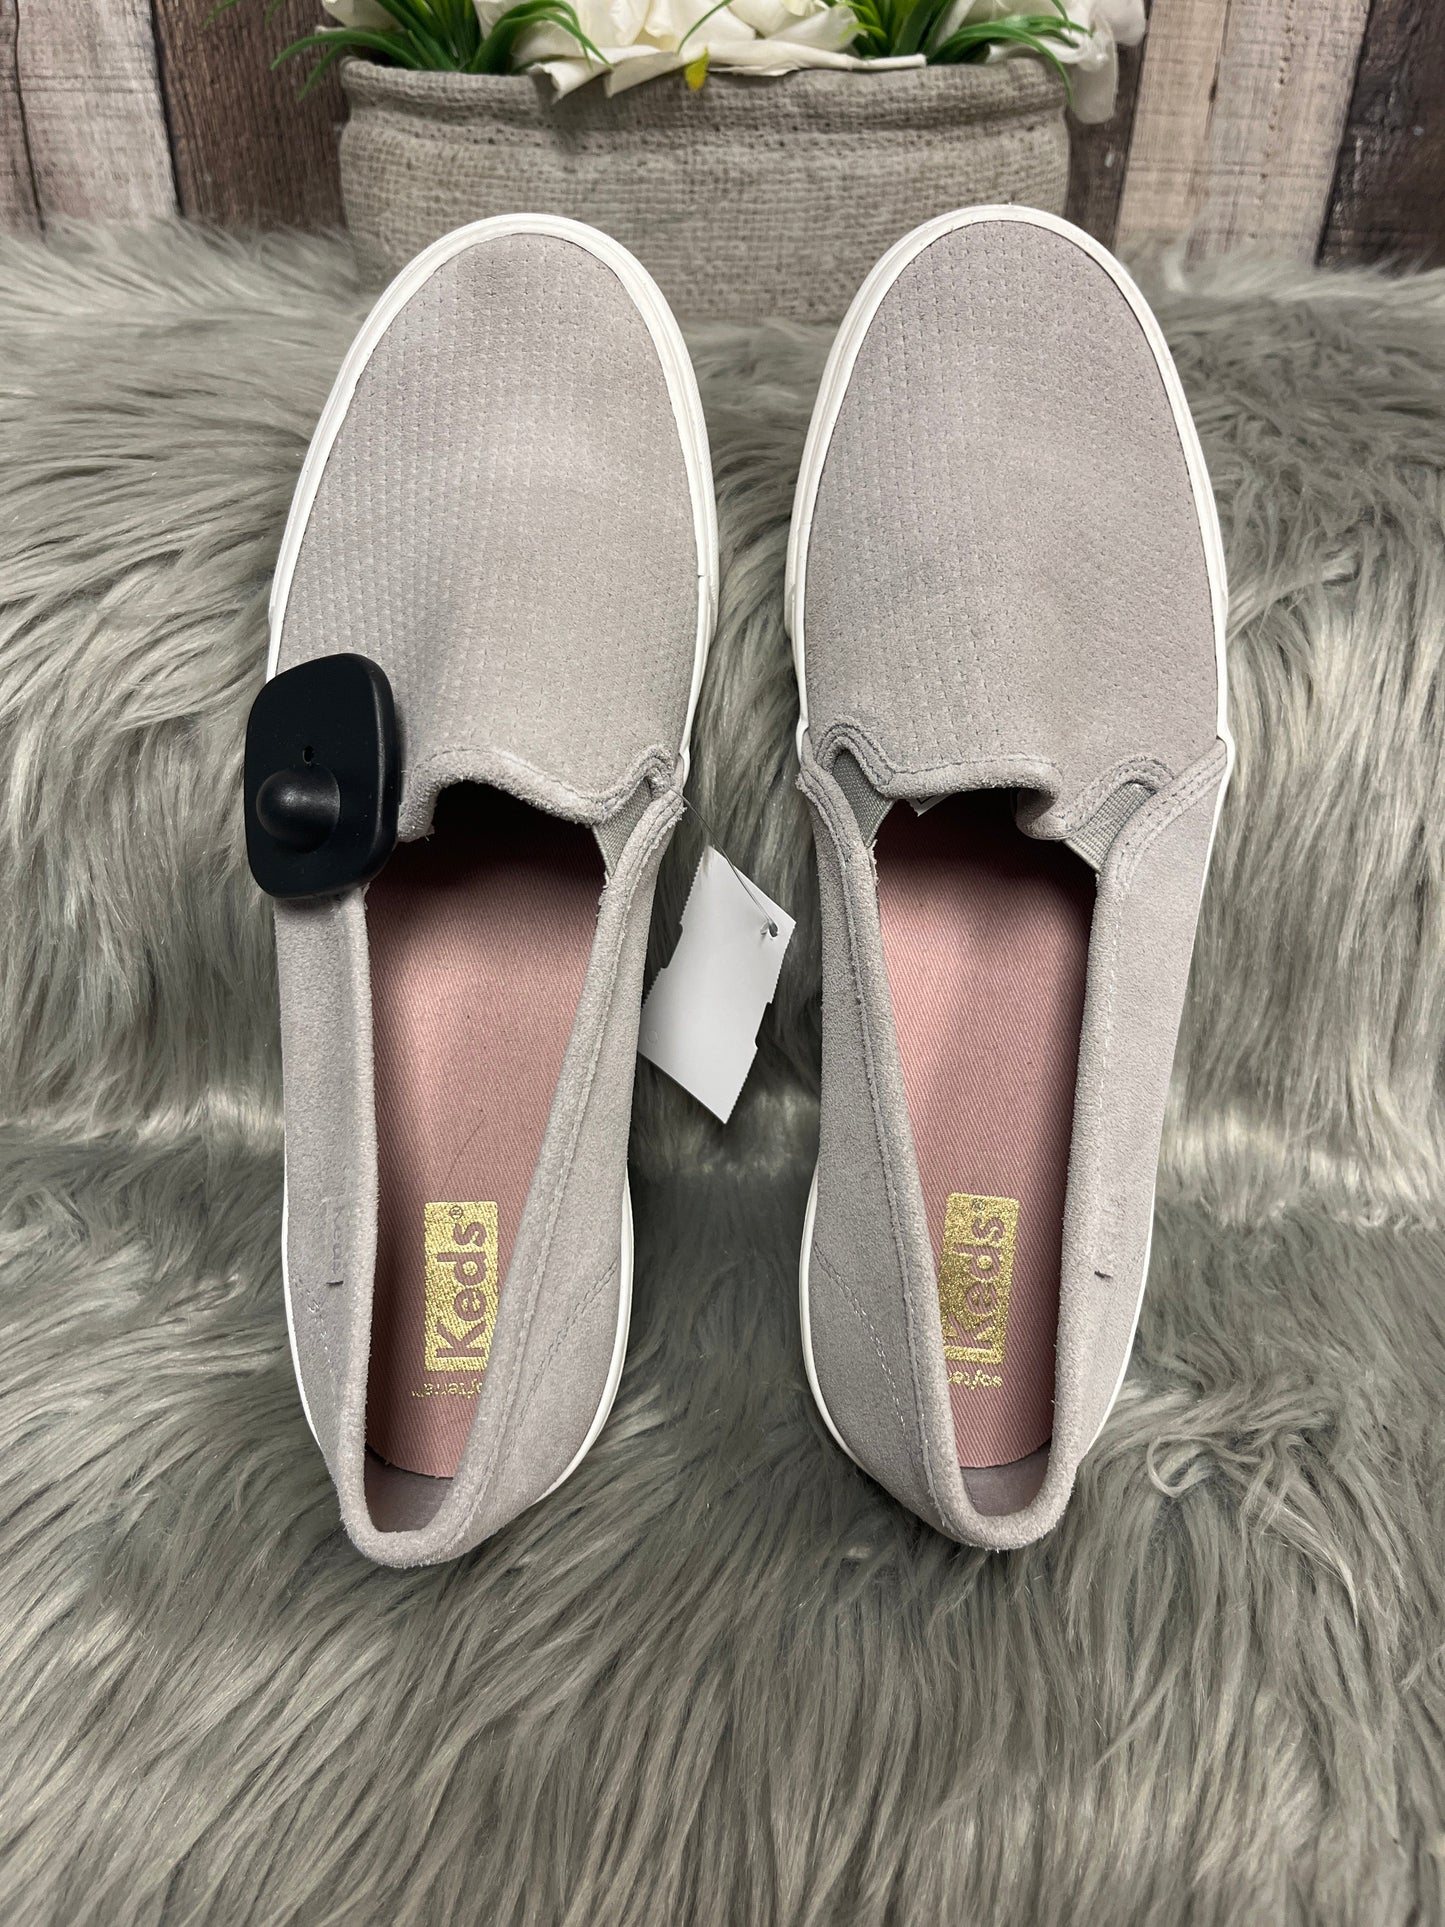 Grey Shoes Sneakers Keds, Size 10